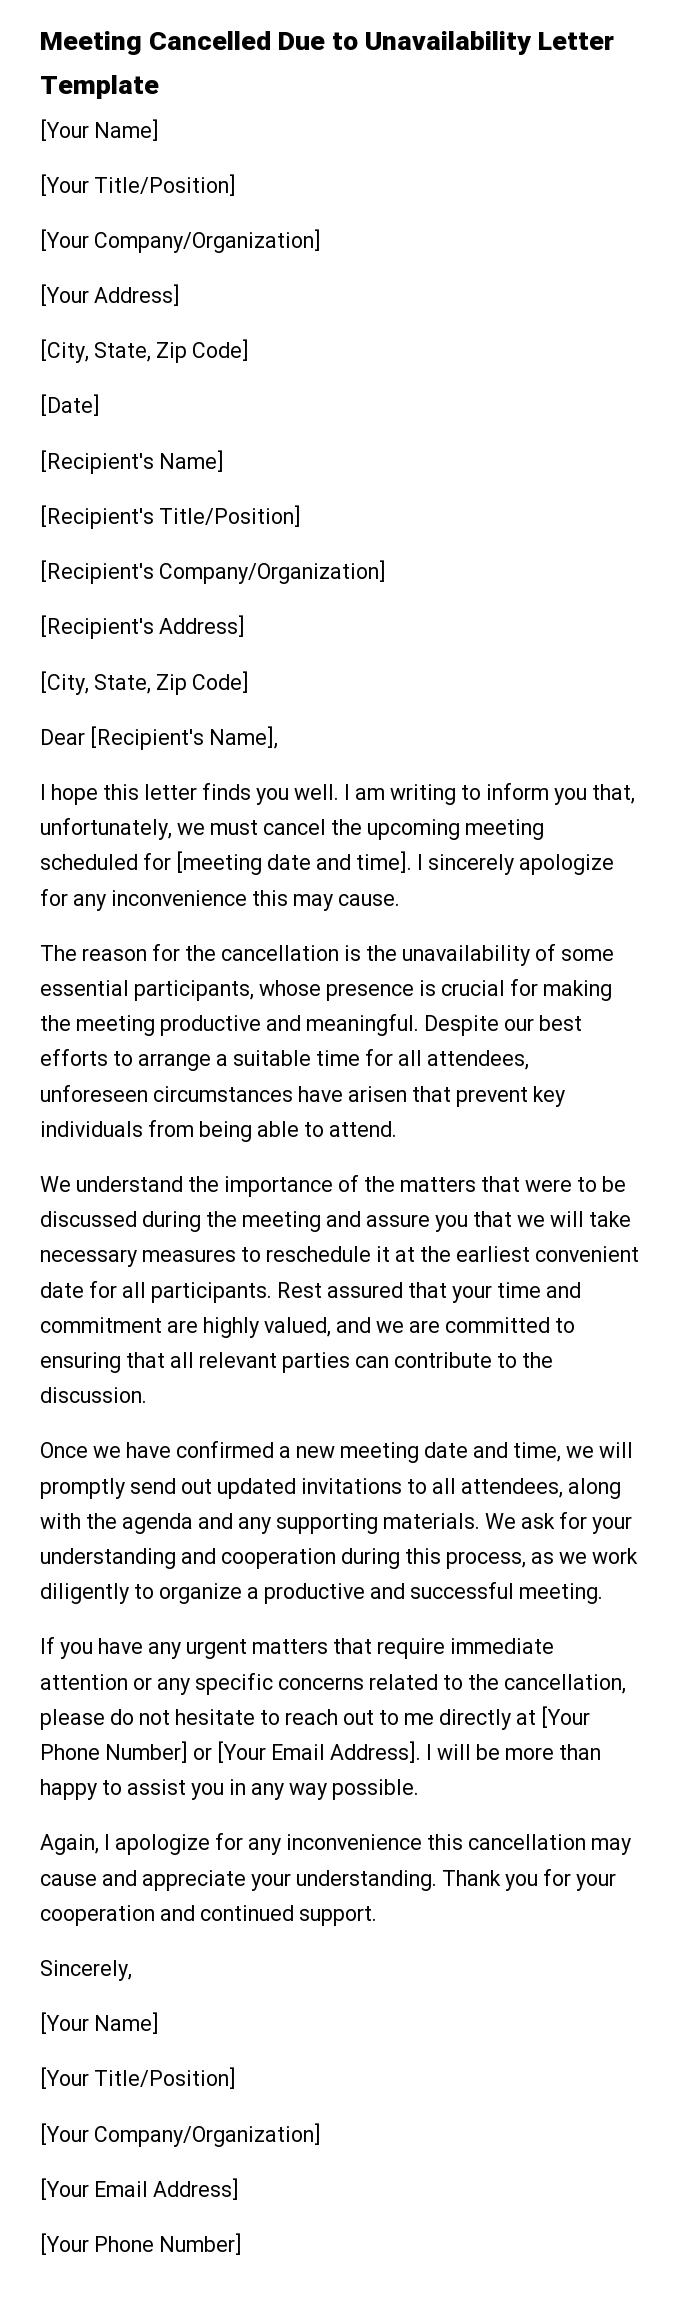 Meeting Cancelled Due to Unavailability Letter Template